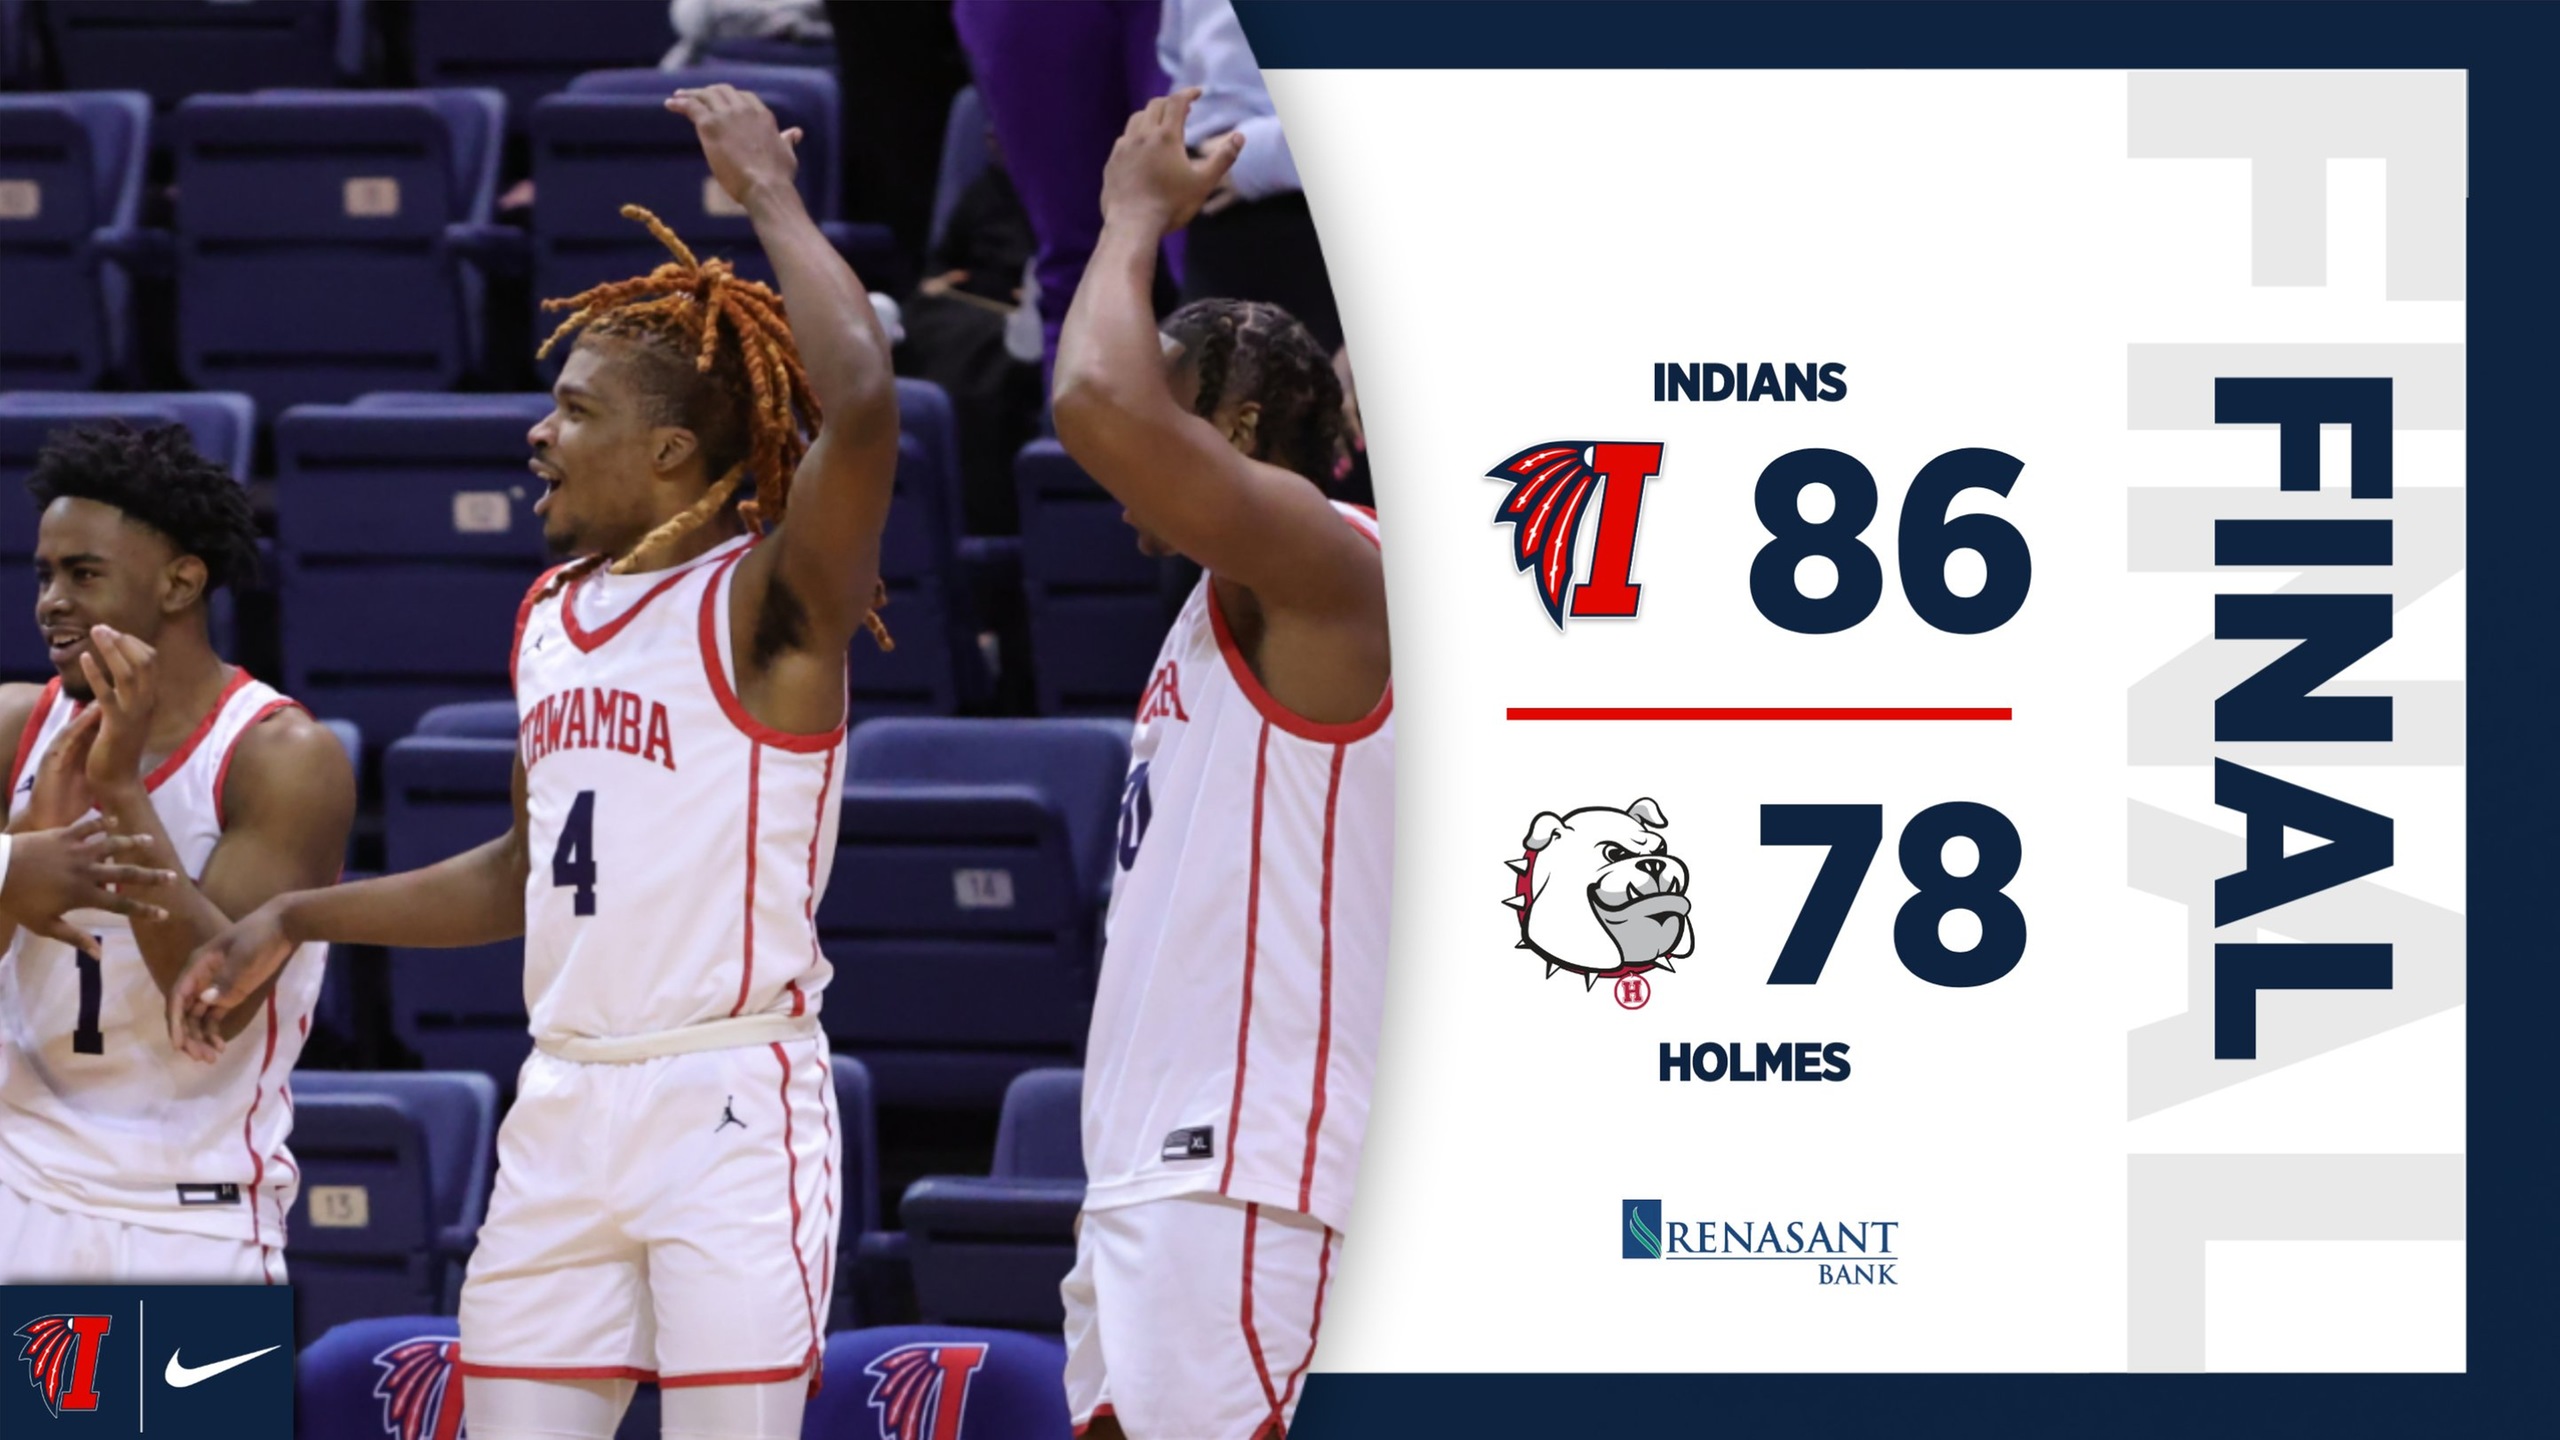 Indians defeat Holmes in double-overtime thriller, 86-78